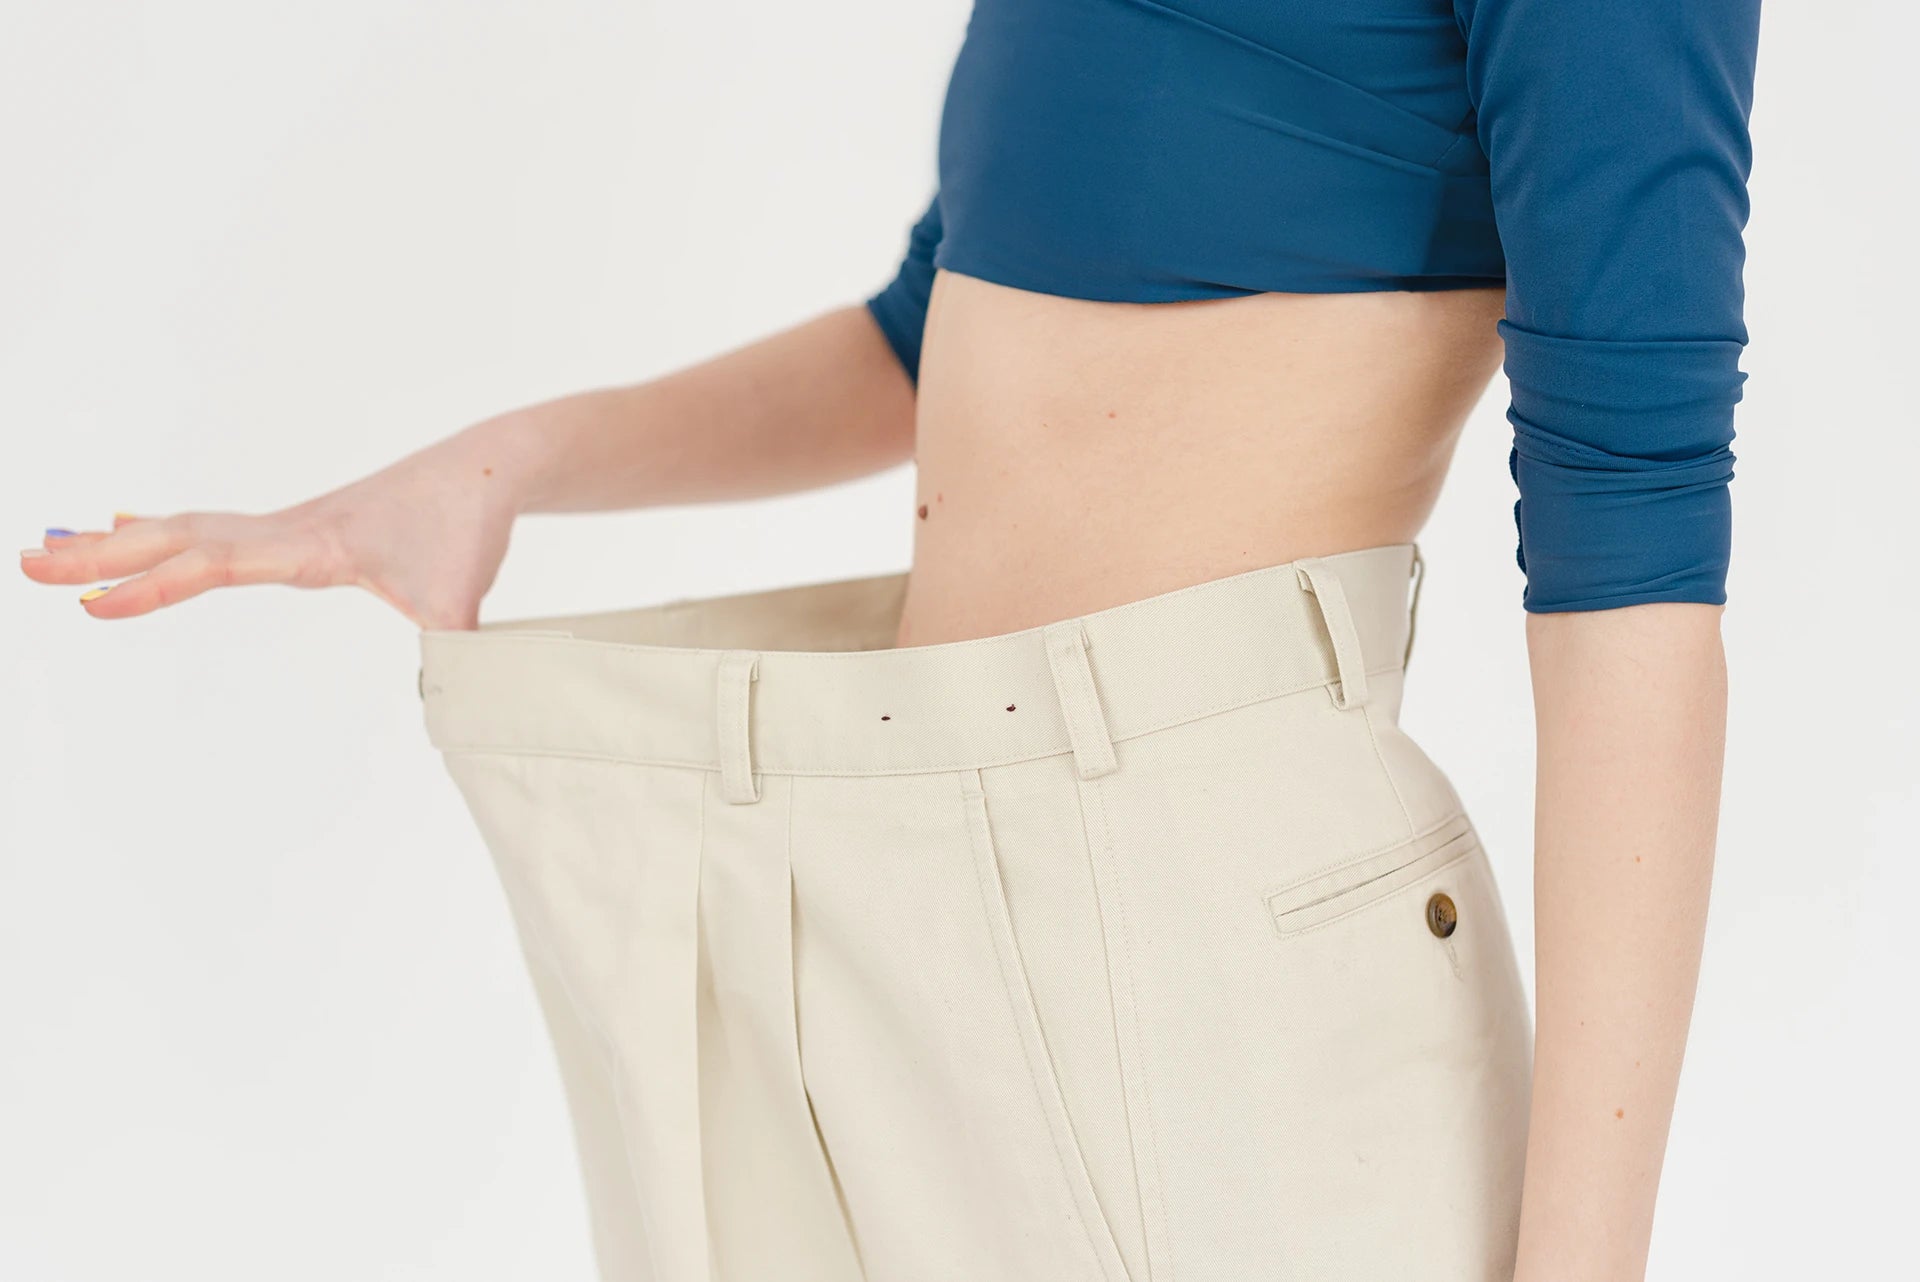 Weight Loss Image - Woman in oversized pants